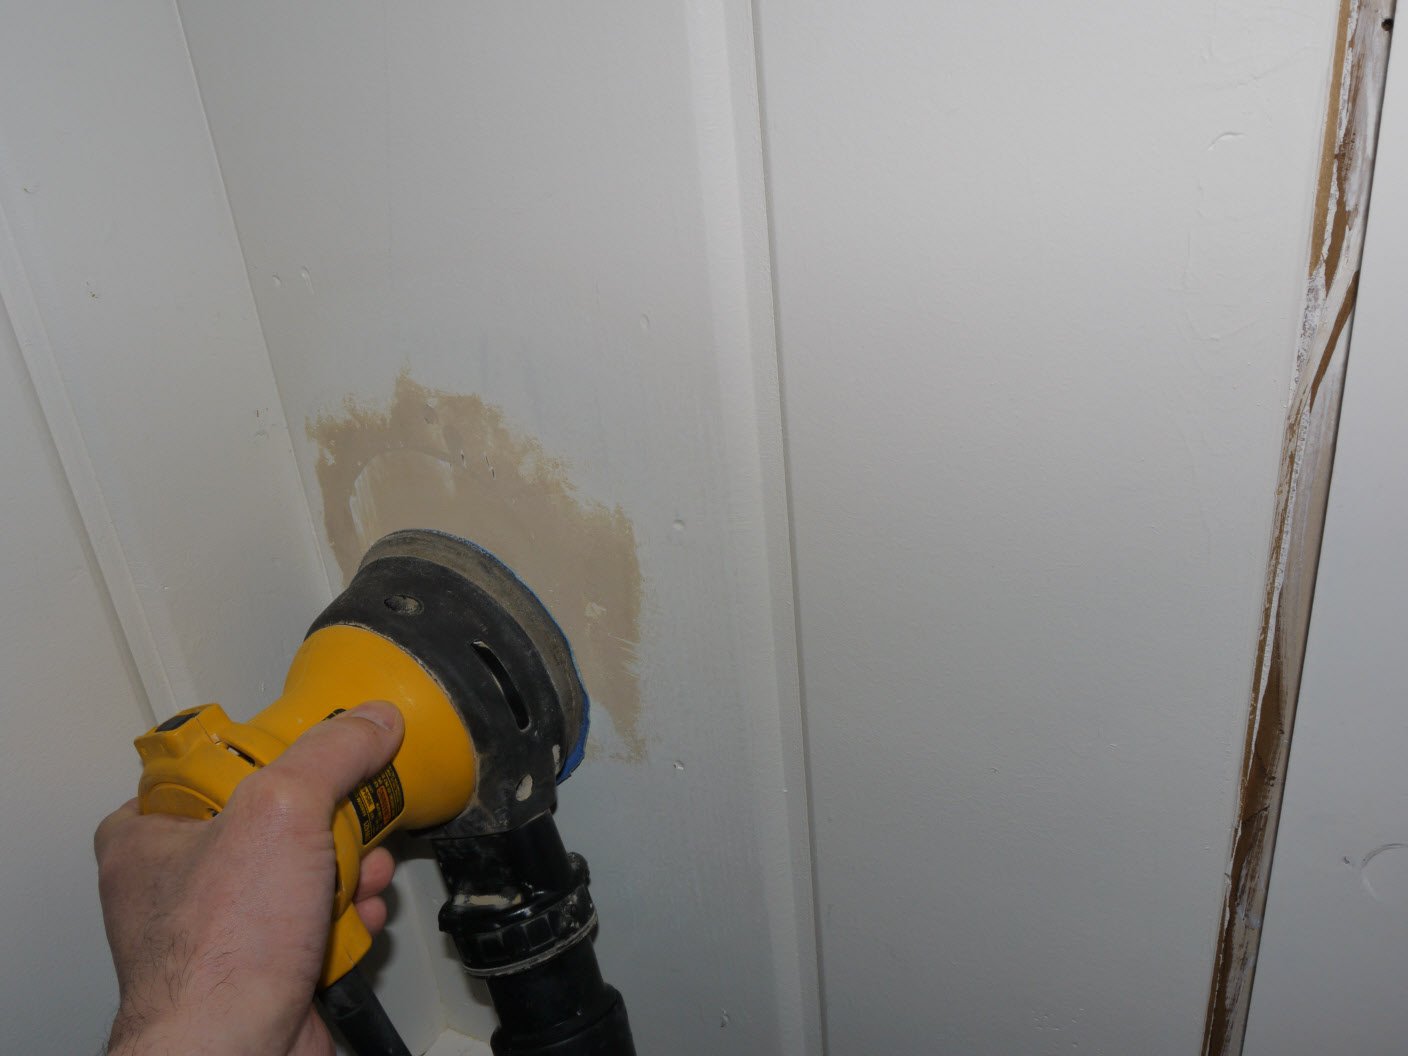 Wood Paneling or Drywall Repair - Cabin DIY How To Fix A Hole In Paneling